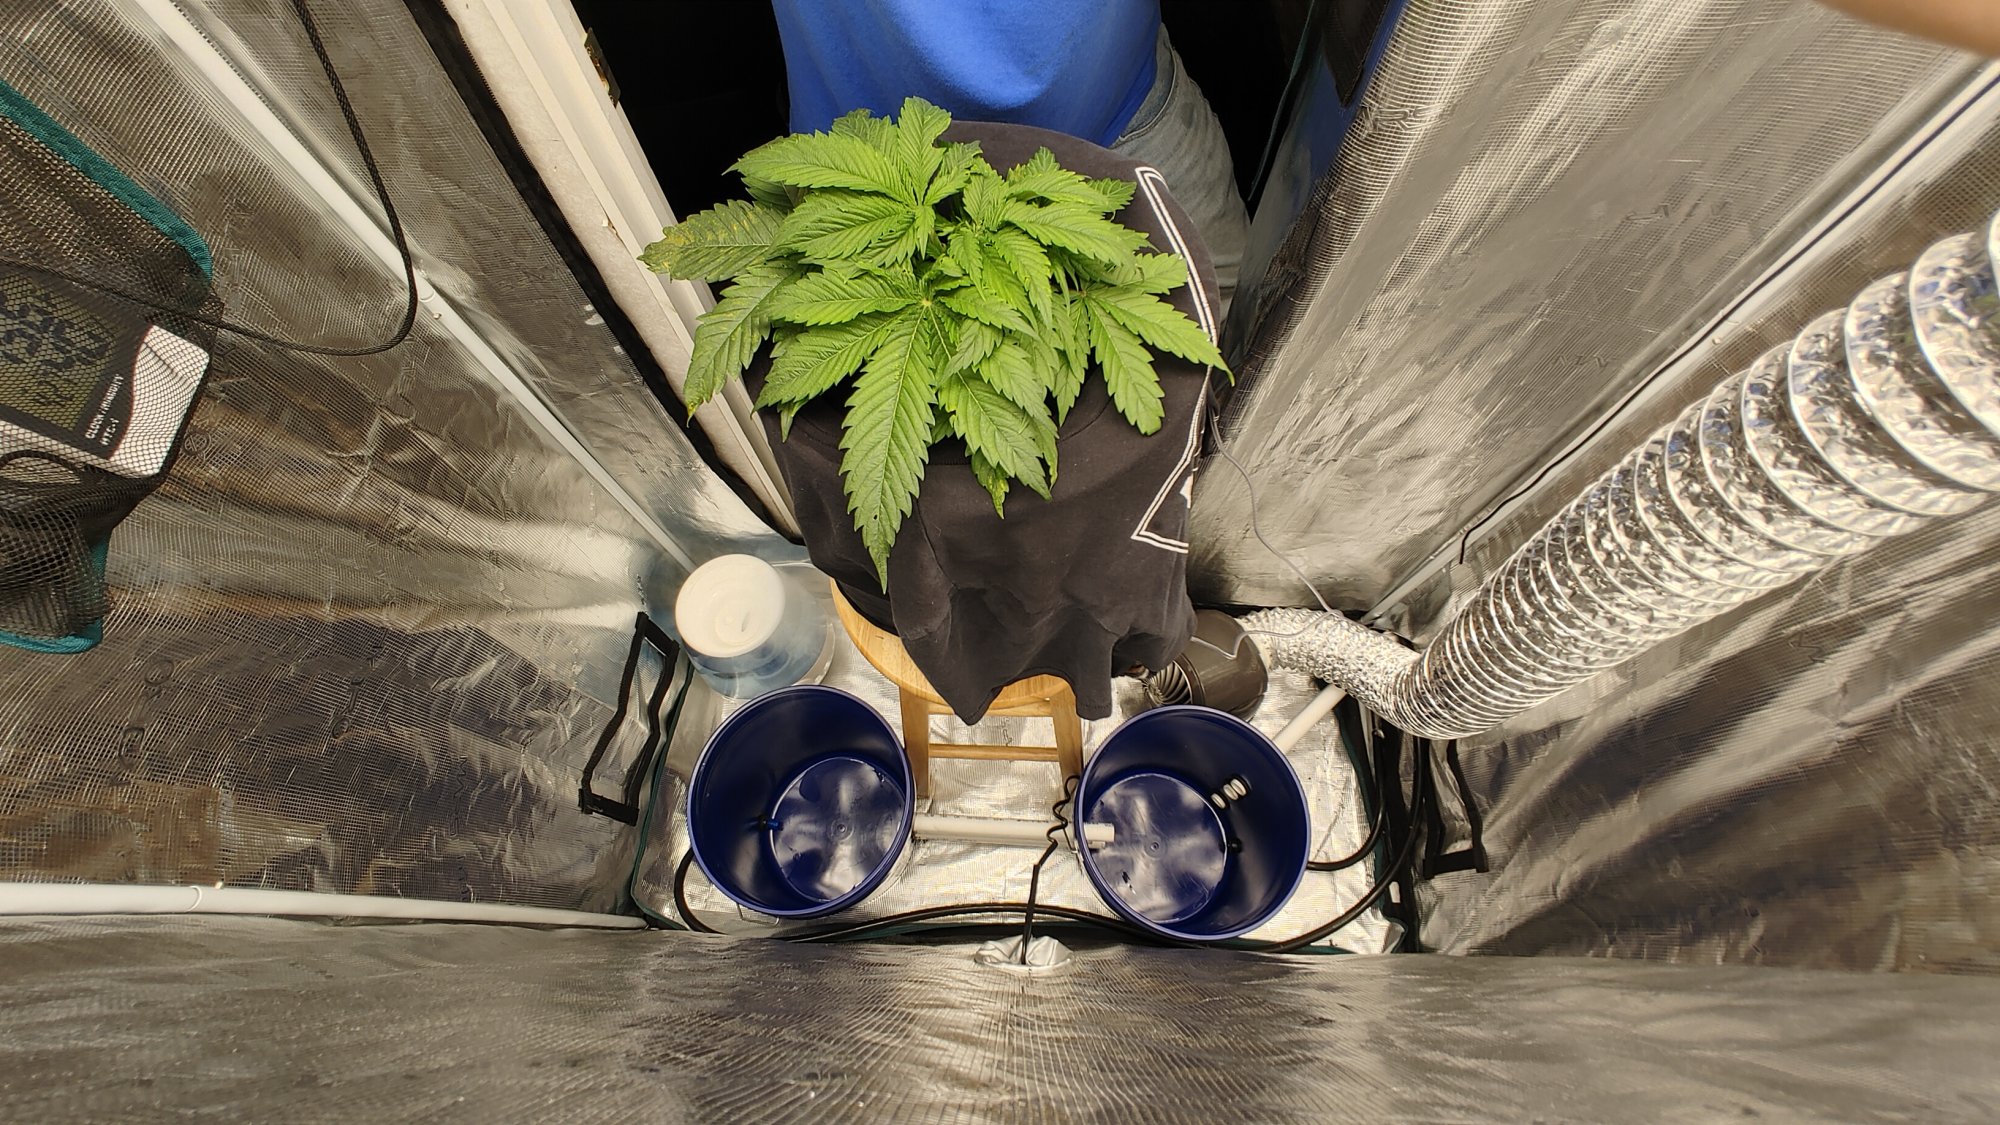 Starting photos in same tent as week 4 auto